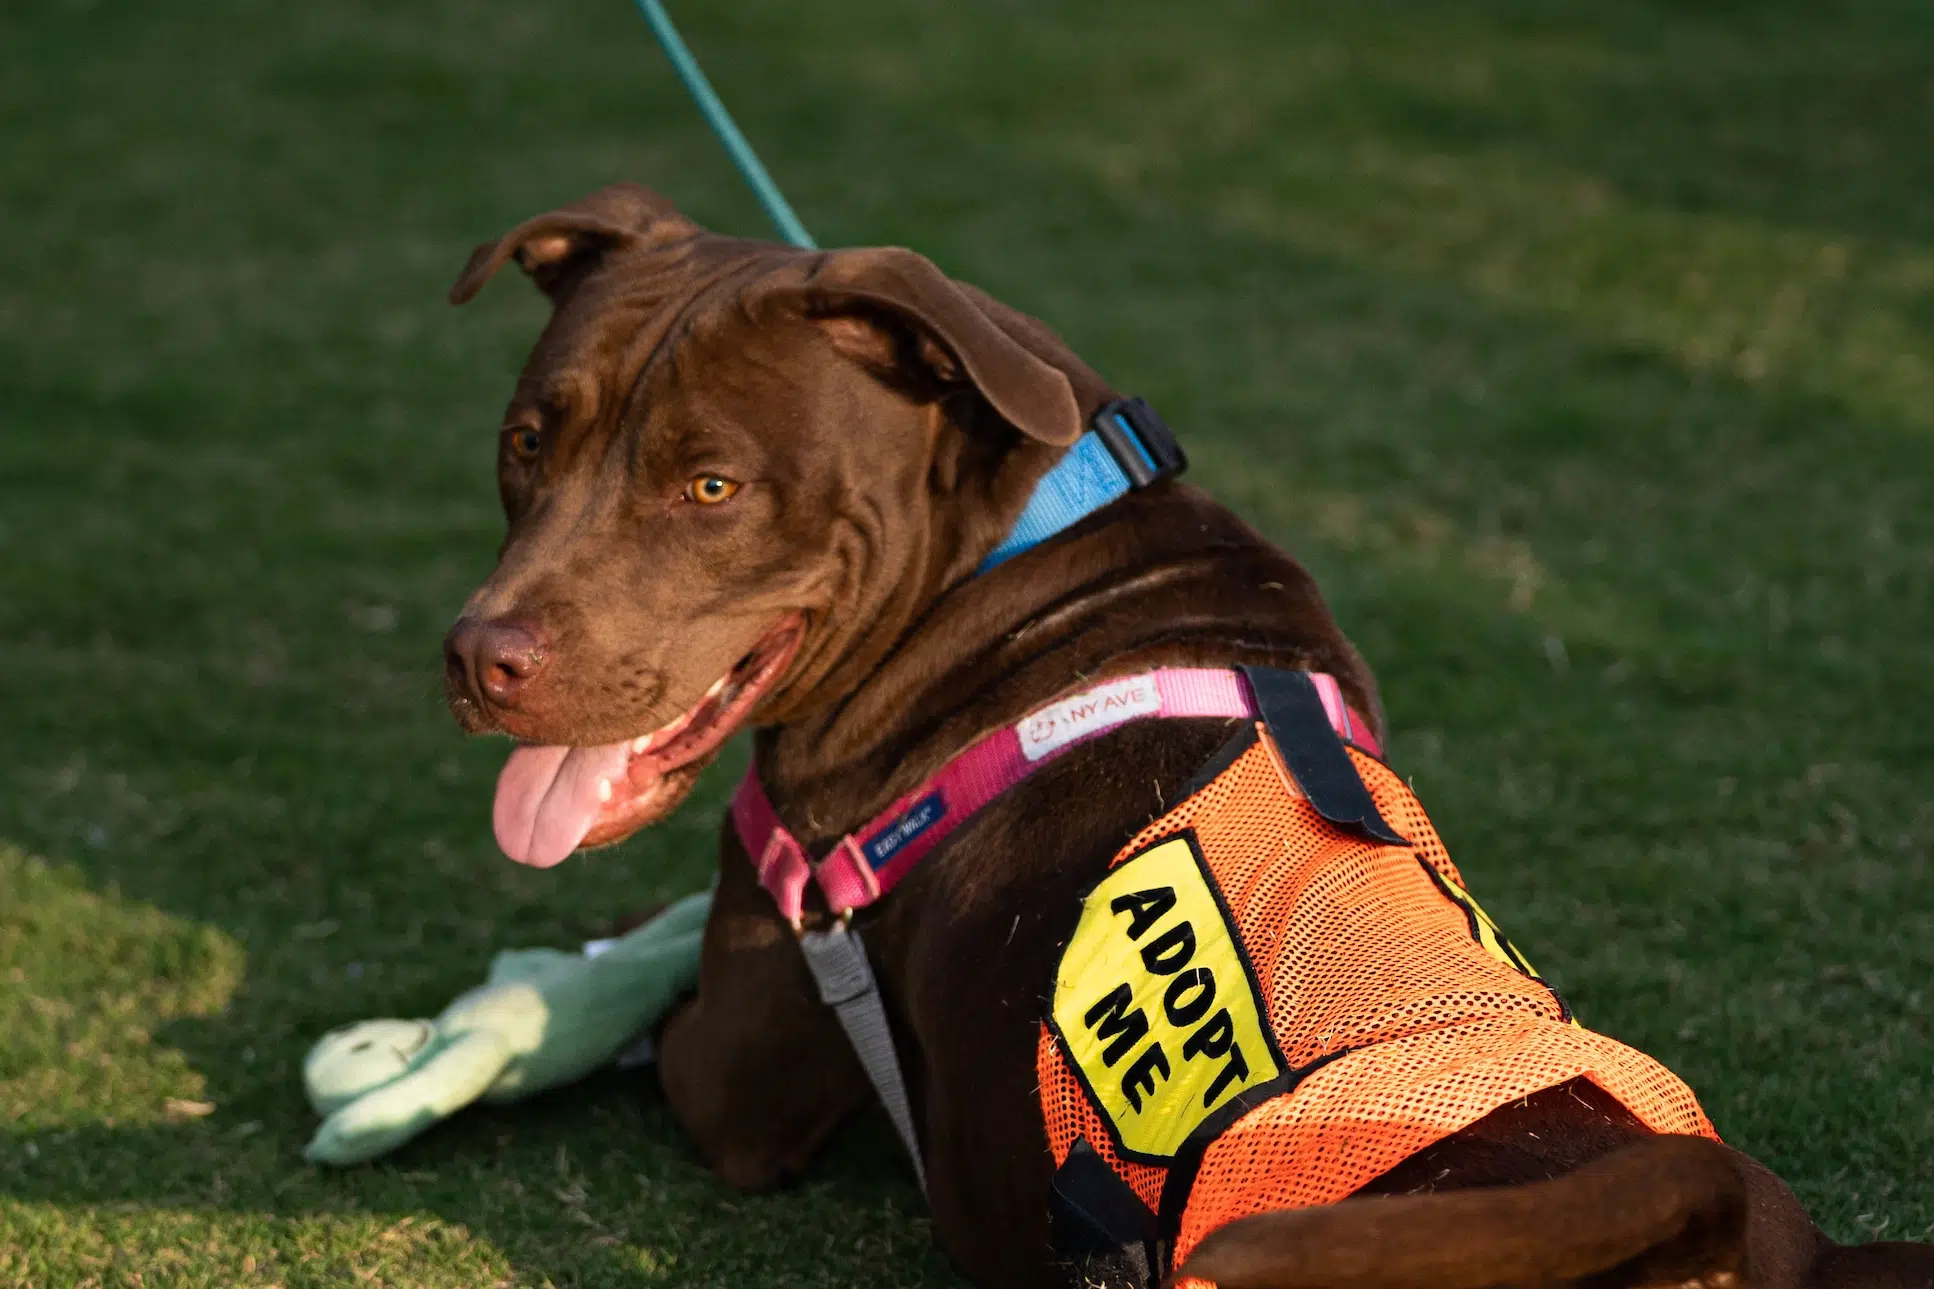 An all brown dog lies down on grass with his tongue out. The dog is wearing a bright orange vest with a yellow patch that says 